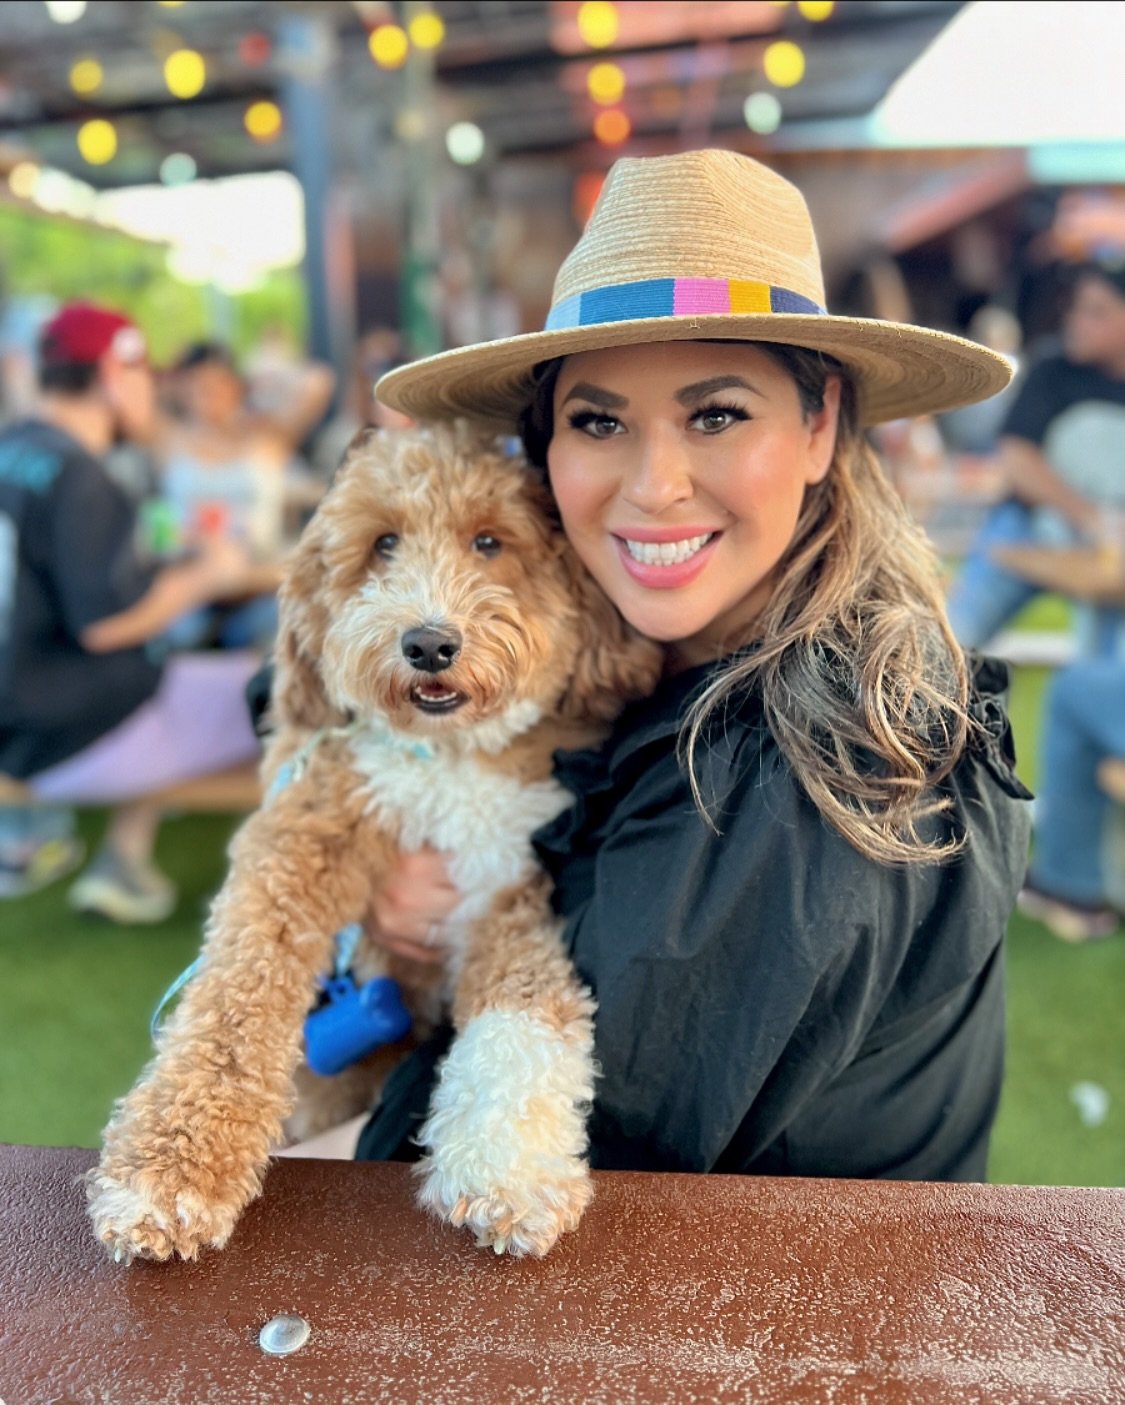 Happy 2nd Birthday Charlie 🐶 I love you so much, you make every day better with your puppy snuggles and kisses 🎂

#stylinbrunette #dogmom #dogbirthday